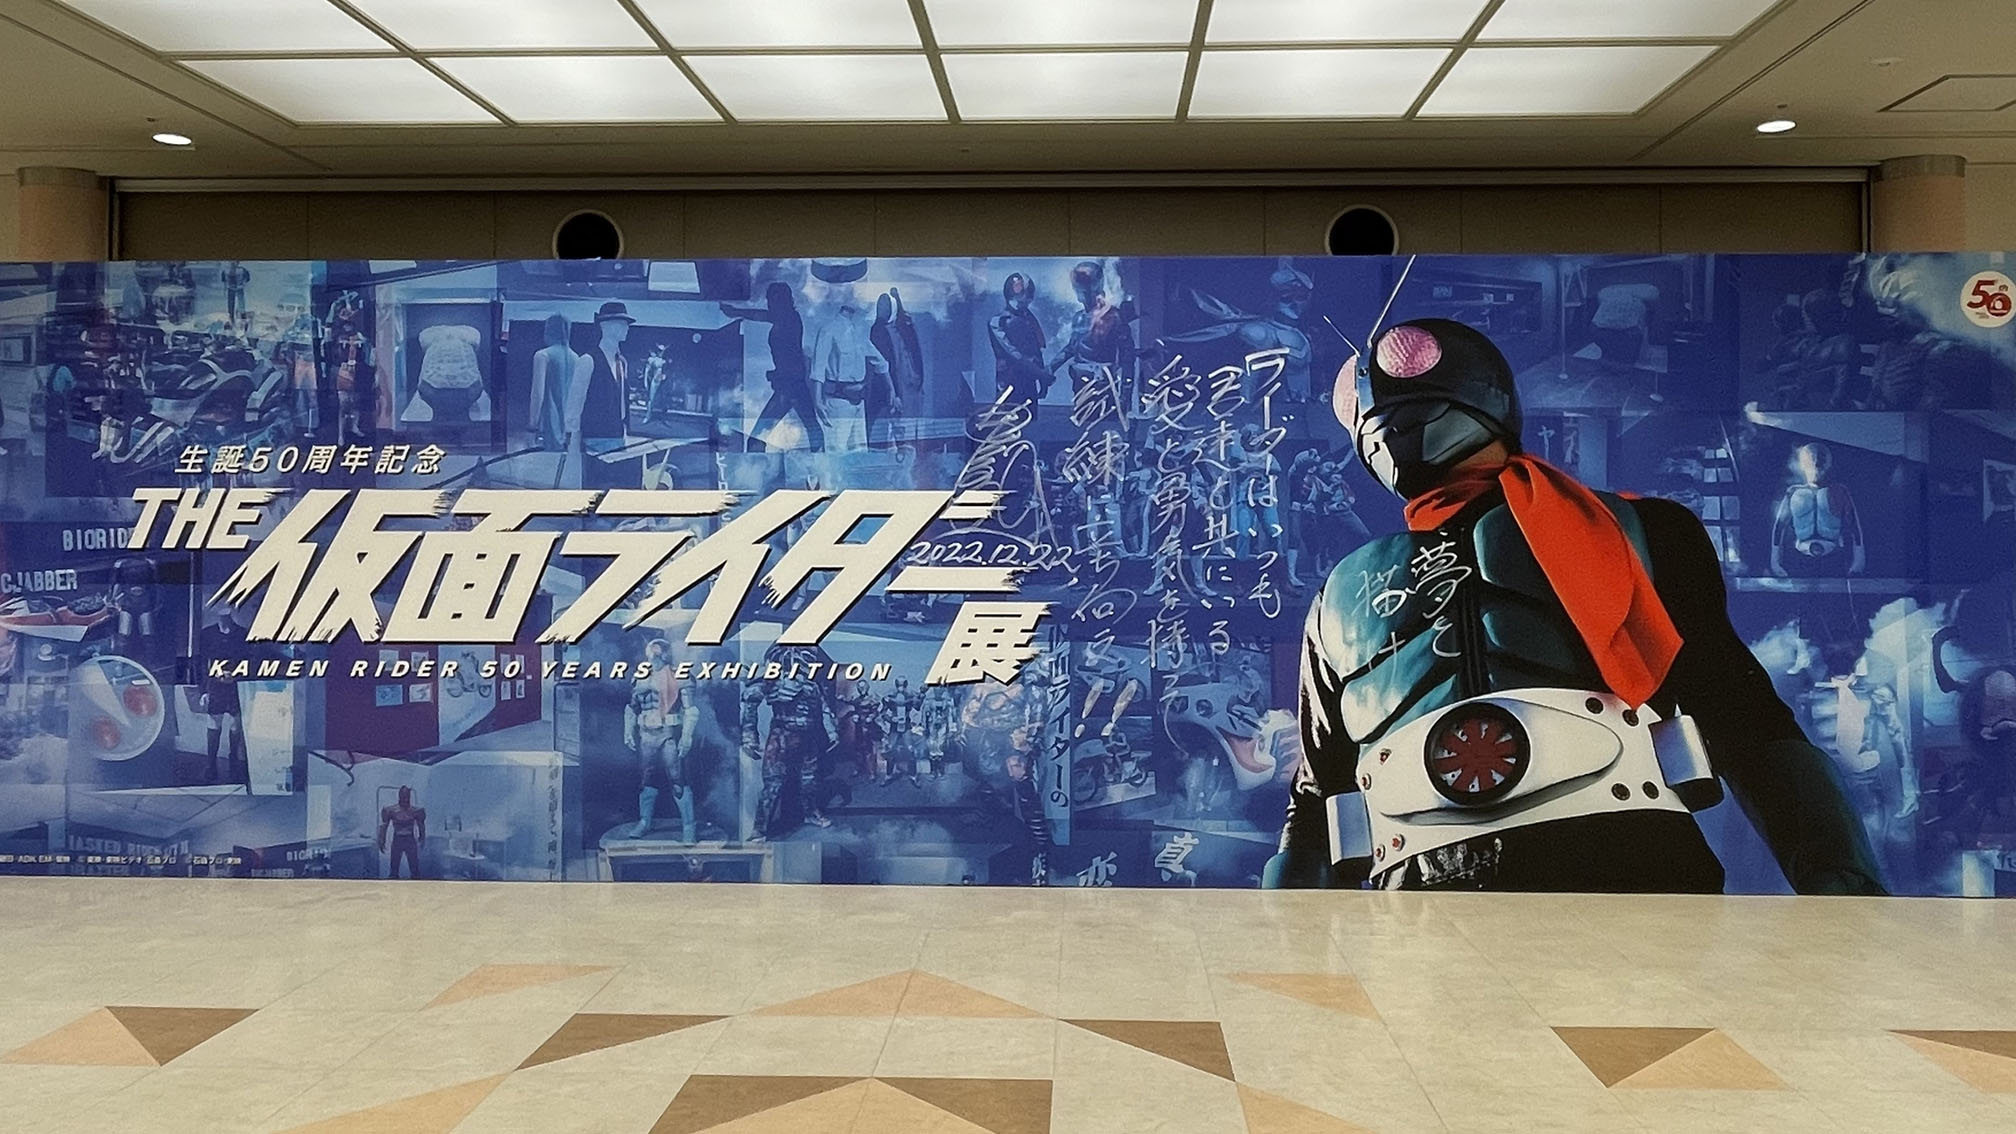 THE仮面ライダー展入口パネル